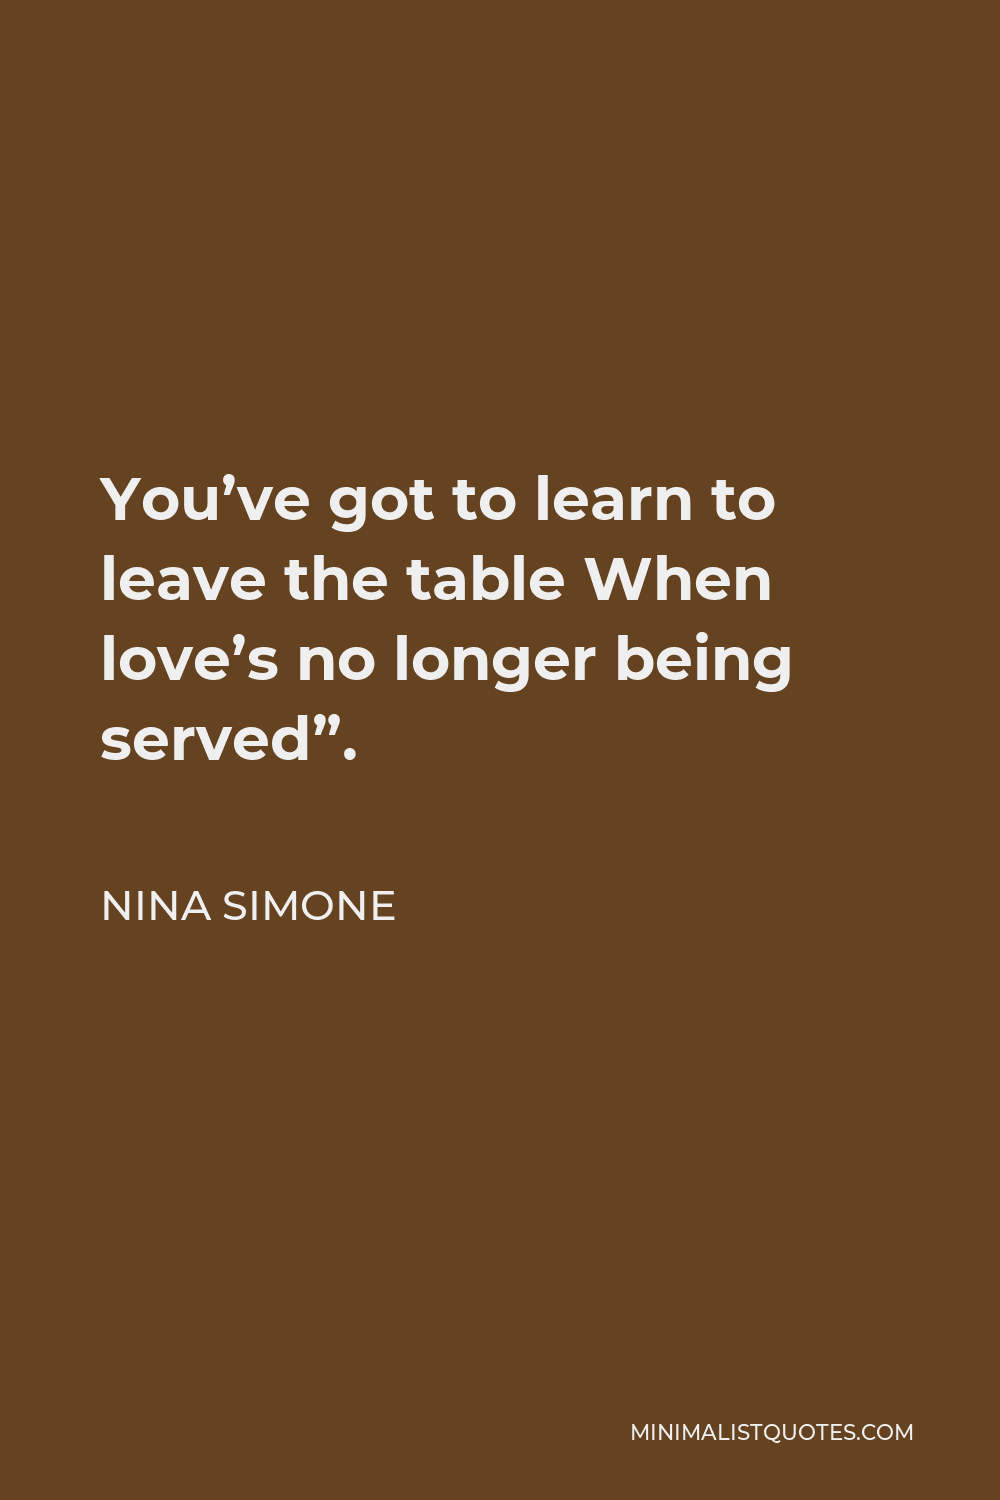 Nina Simone Quote - You’ve got to learn to leave the table When love’s no longer being served”.